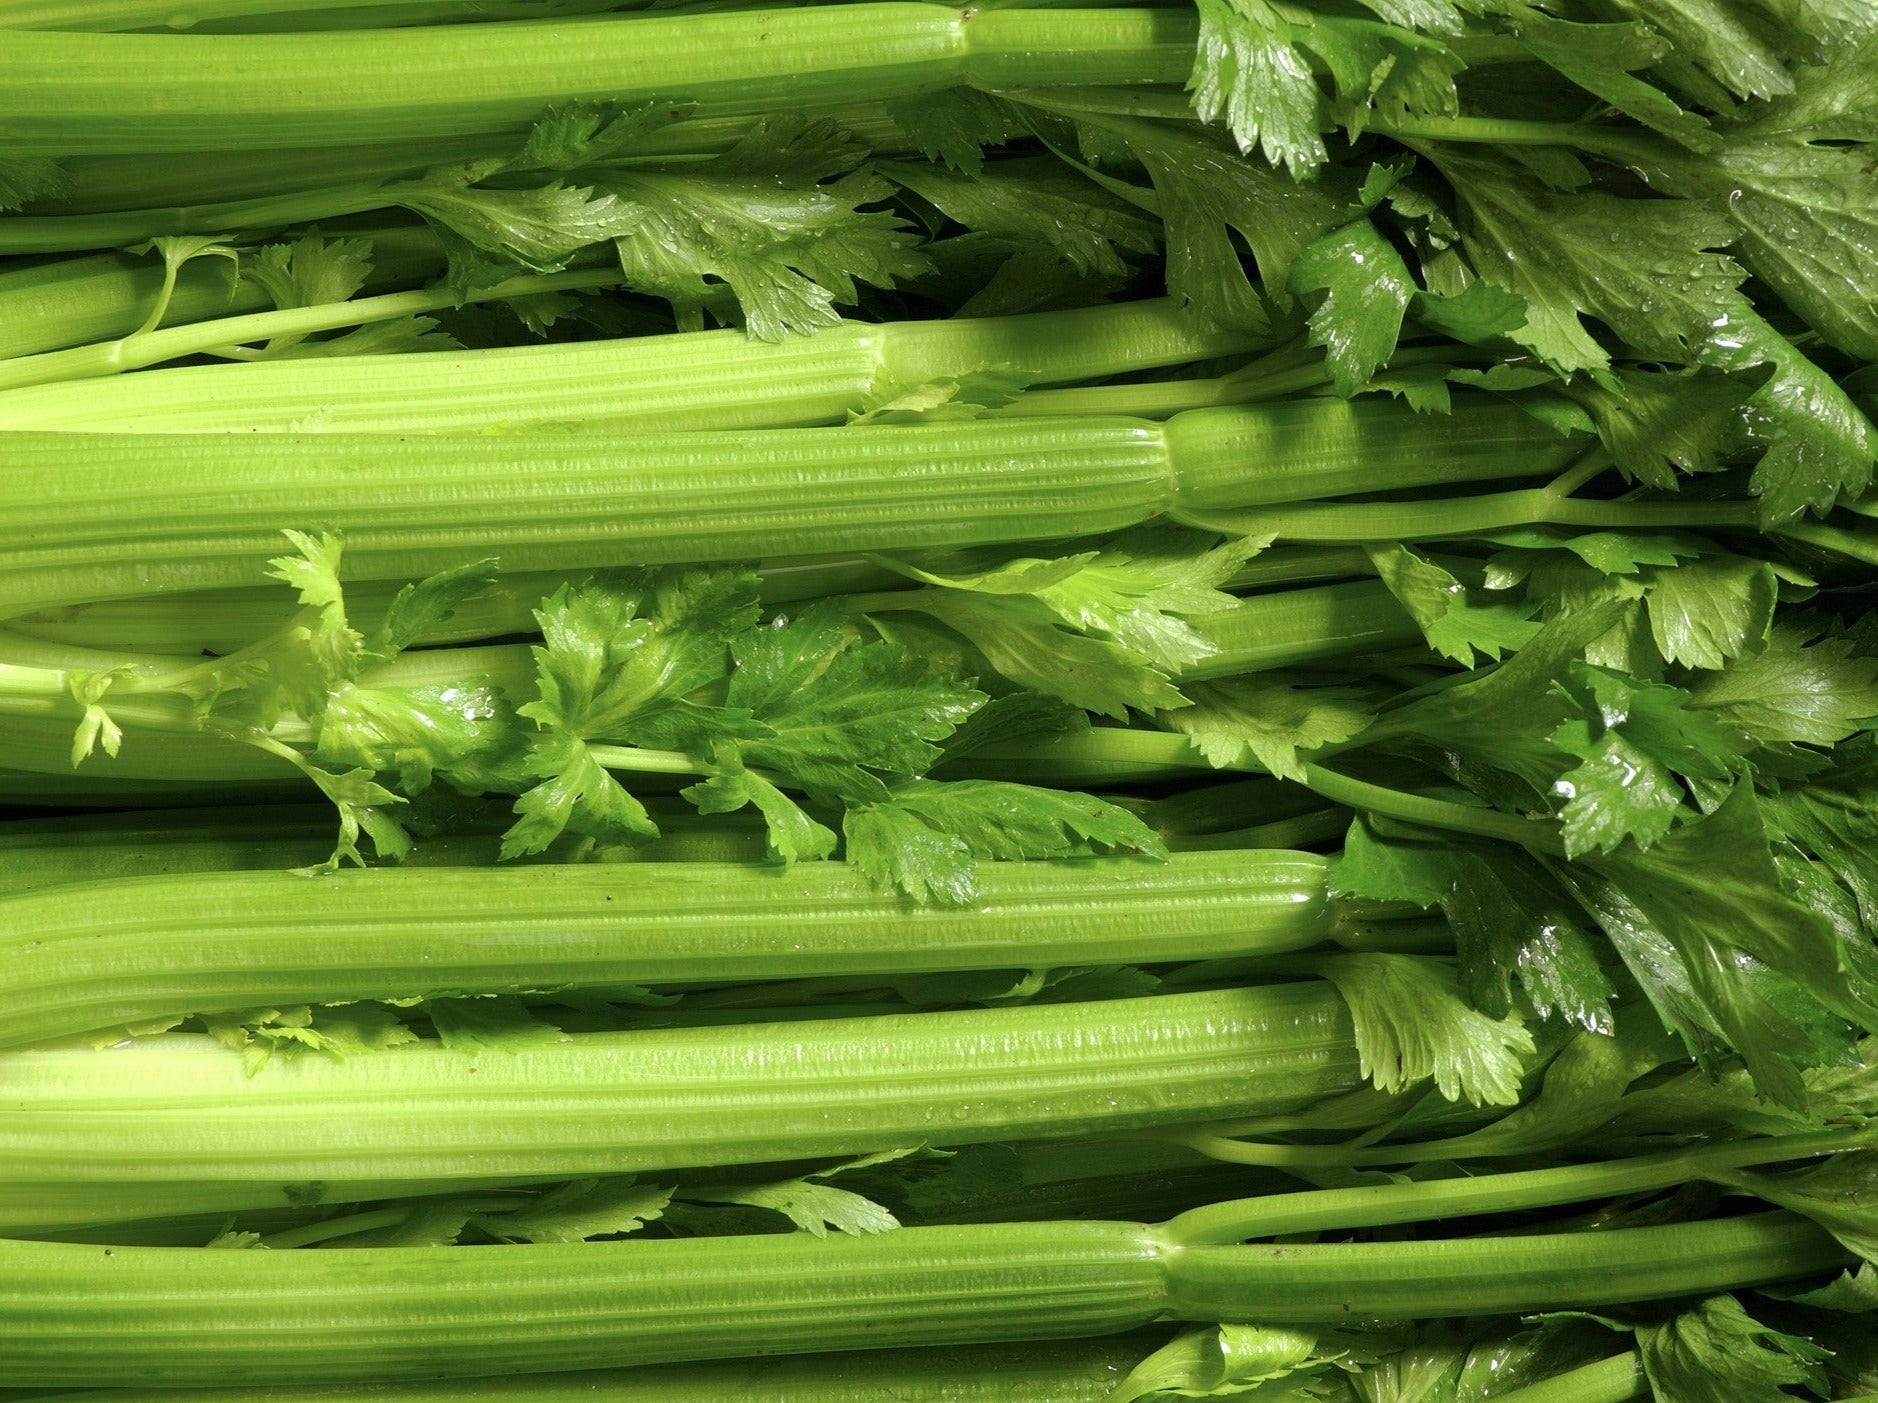 Live2Give Farm Organic Celery - Whole Large Bunch